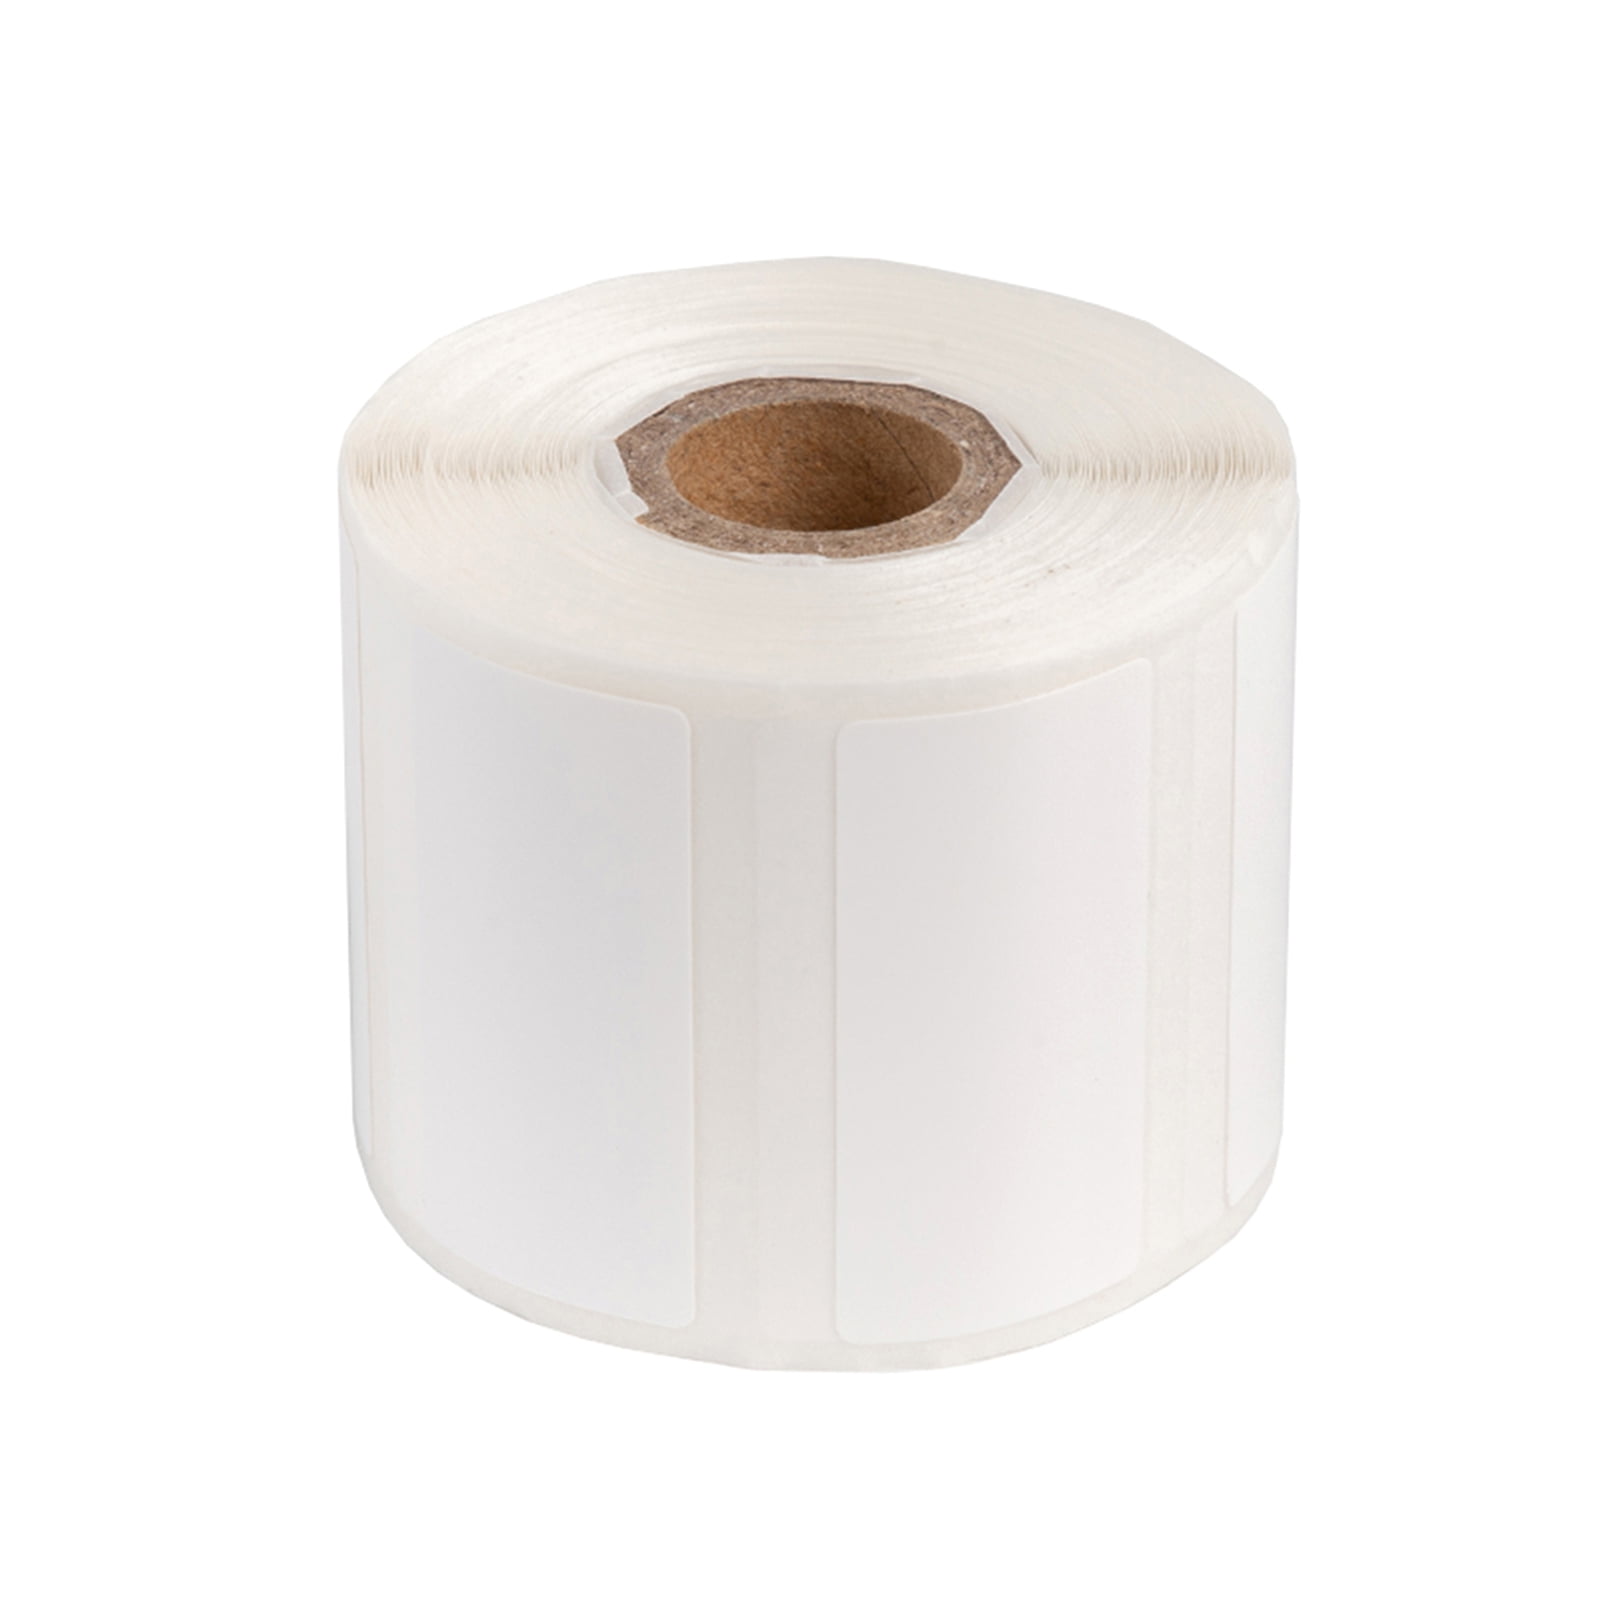 Aibecy Self-Adhesive Thermal Paper Roll Name Size Price Label Paper 50*80mm E8J7 